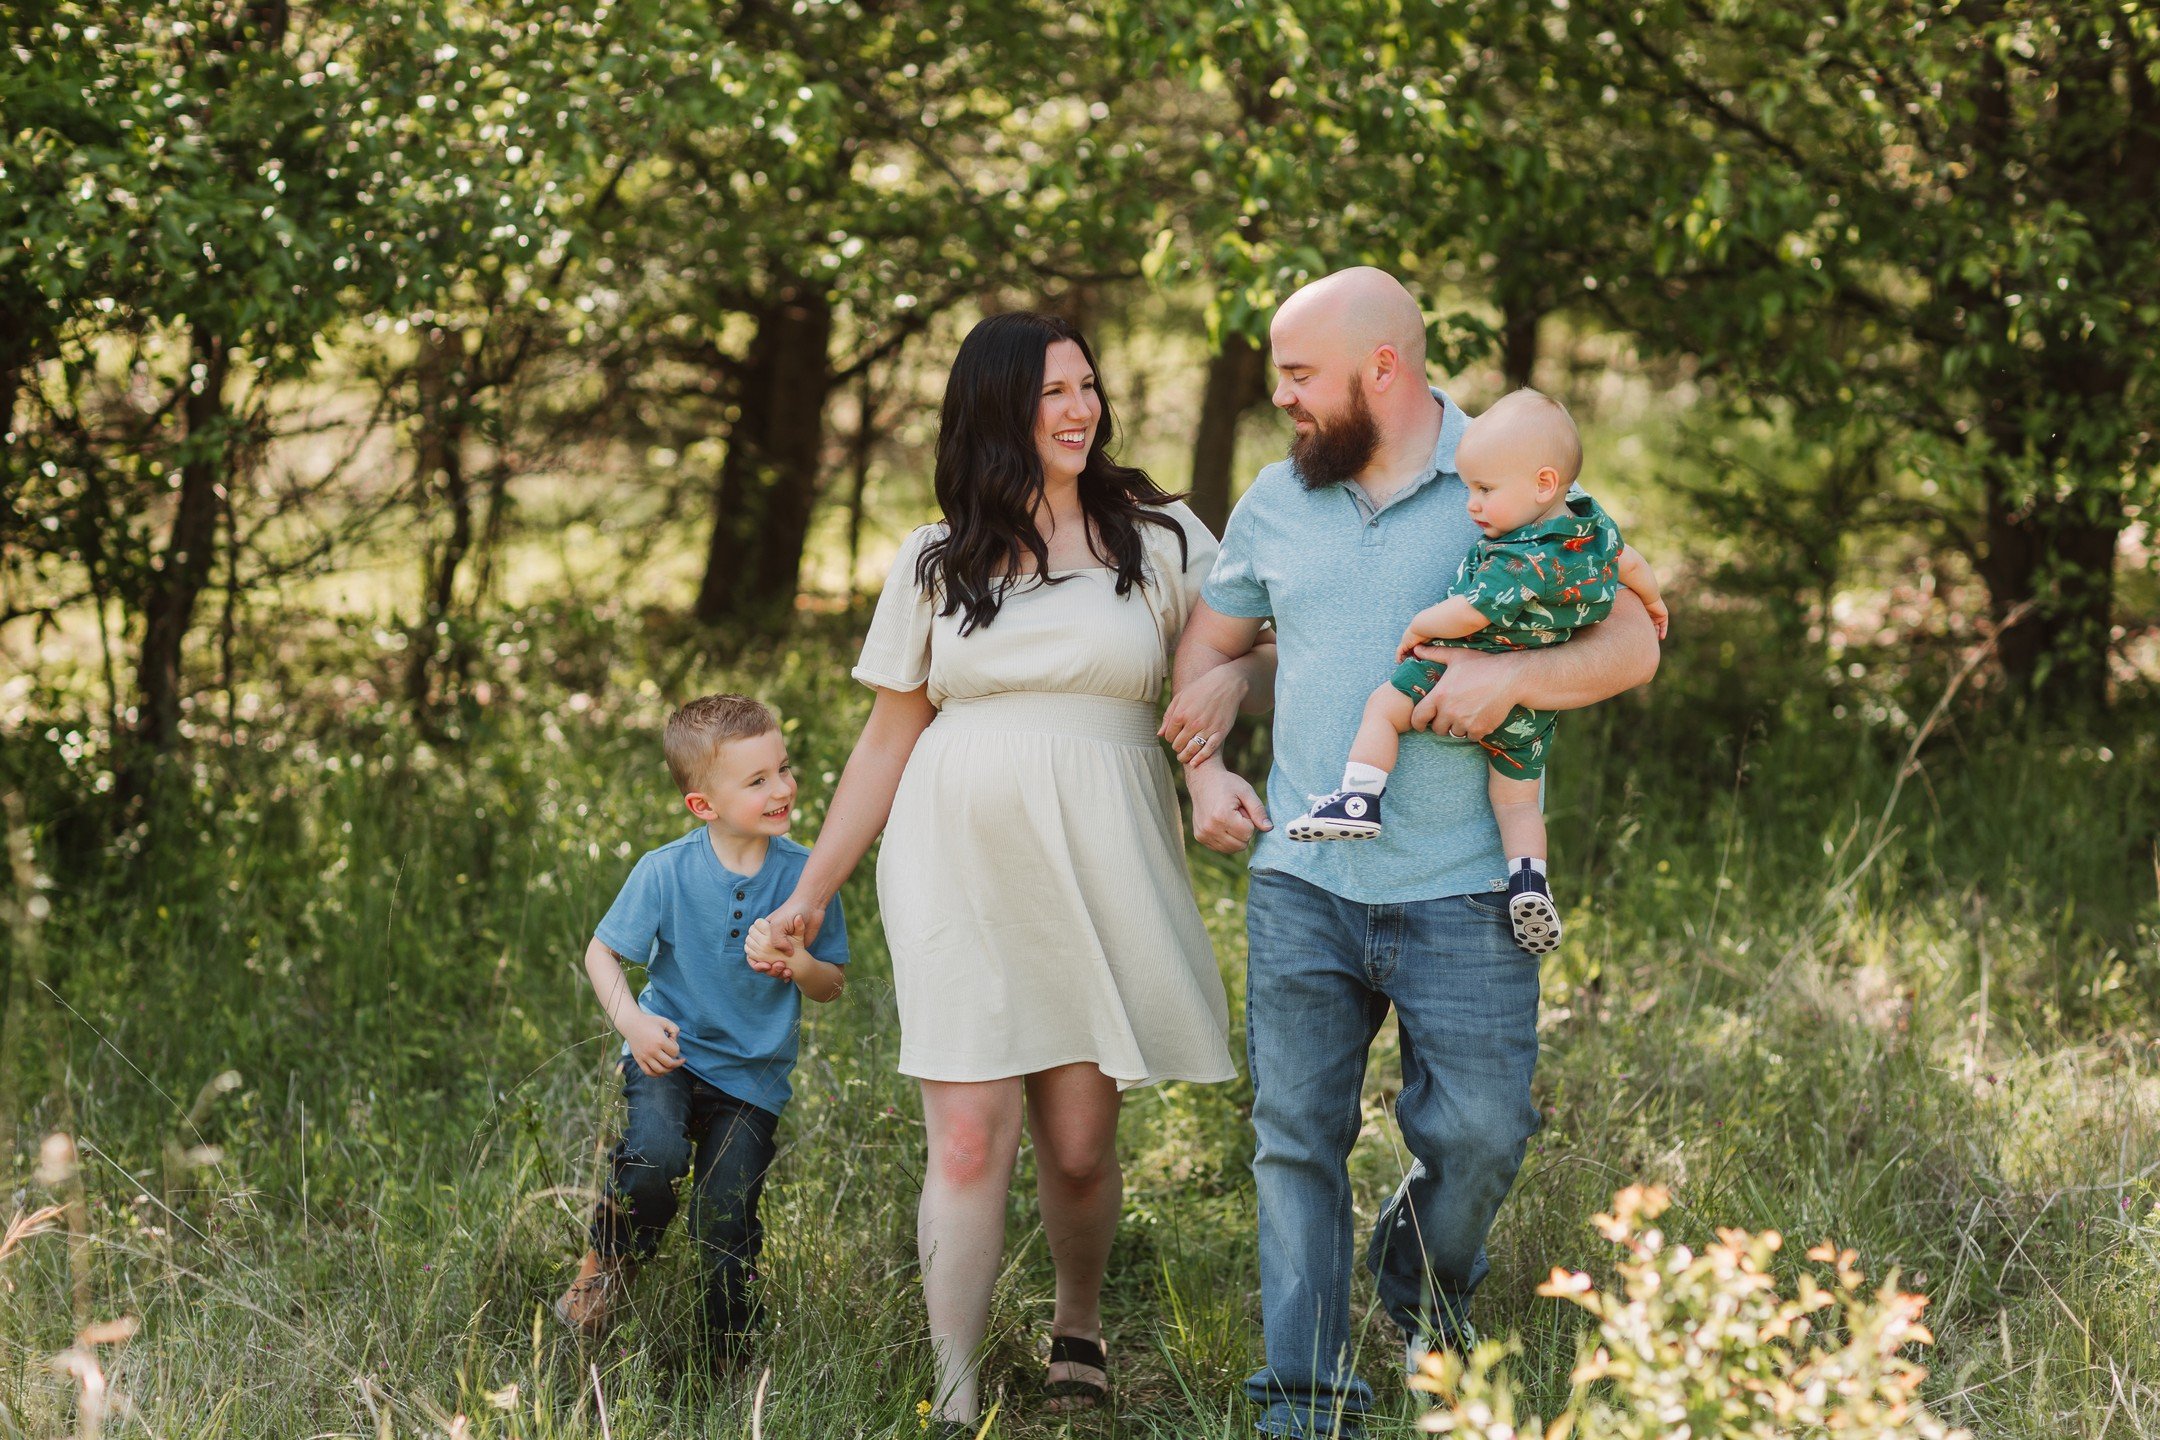 Missouri has officially bloomed! It's so nice to look outside and see the trees full of lush greens and LIFE! again. 🥰

I still have openings for spring family portraits! Head over to my website and send me a message OR book directly from the bookin